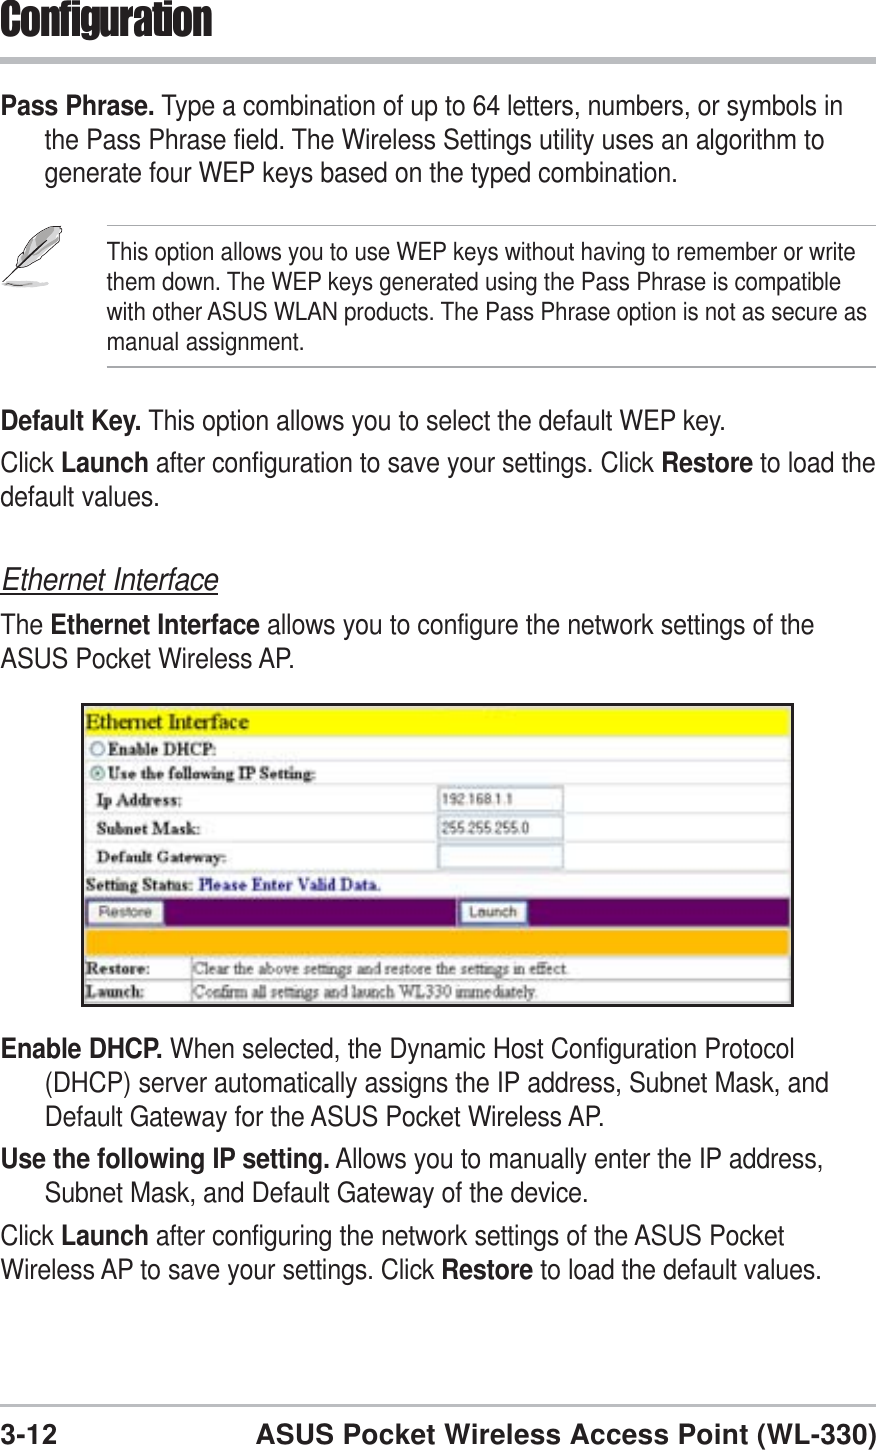 3-12ASUS Pocket Wireless Access Point (WL-330)ConfigurationEthernet InterfaceThe Ethernet Interface allows you to configure the network settings of theASUS Pocket Wireless AP.Enable DHCP. When selected, the Dynamic Host Configuration Protocol(DHCP) server automatically assigns the IP address, Subnet Mask, andDefault Gateway for the ASUS Pocket Wireless AP.Use the following IP setting. Allows you to manually enter the IP address,Subnet Mask, and Default Gateway of the device.Click Launch after configuring the network settings of the ASUS PocketWireless AP to save your settings. Click Restore to load the default values.Pass Phrase. Type a combination of up to 64 letters, numbers, or symbols inthe Pass Phrase field. The Wireless Settings utility uses an algorithm togenerate four WEP keys based on the typed combination.Default Key. This option allows you to select the default WEP key.Click Launch after configuration to save your settings. Click Restore to load thedefault values.This option allows you to use WEP keys without having to remember or writethem down. The WEP keys generated using the Pass Phrase is compatiblewith other ASUS WLAN products. The Pass Phrase option is not as secure asmanual assignment.